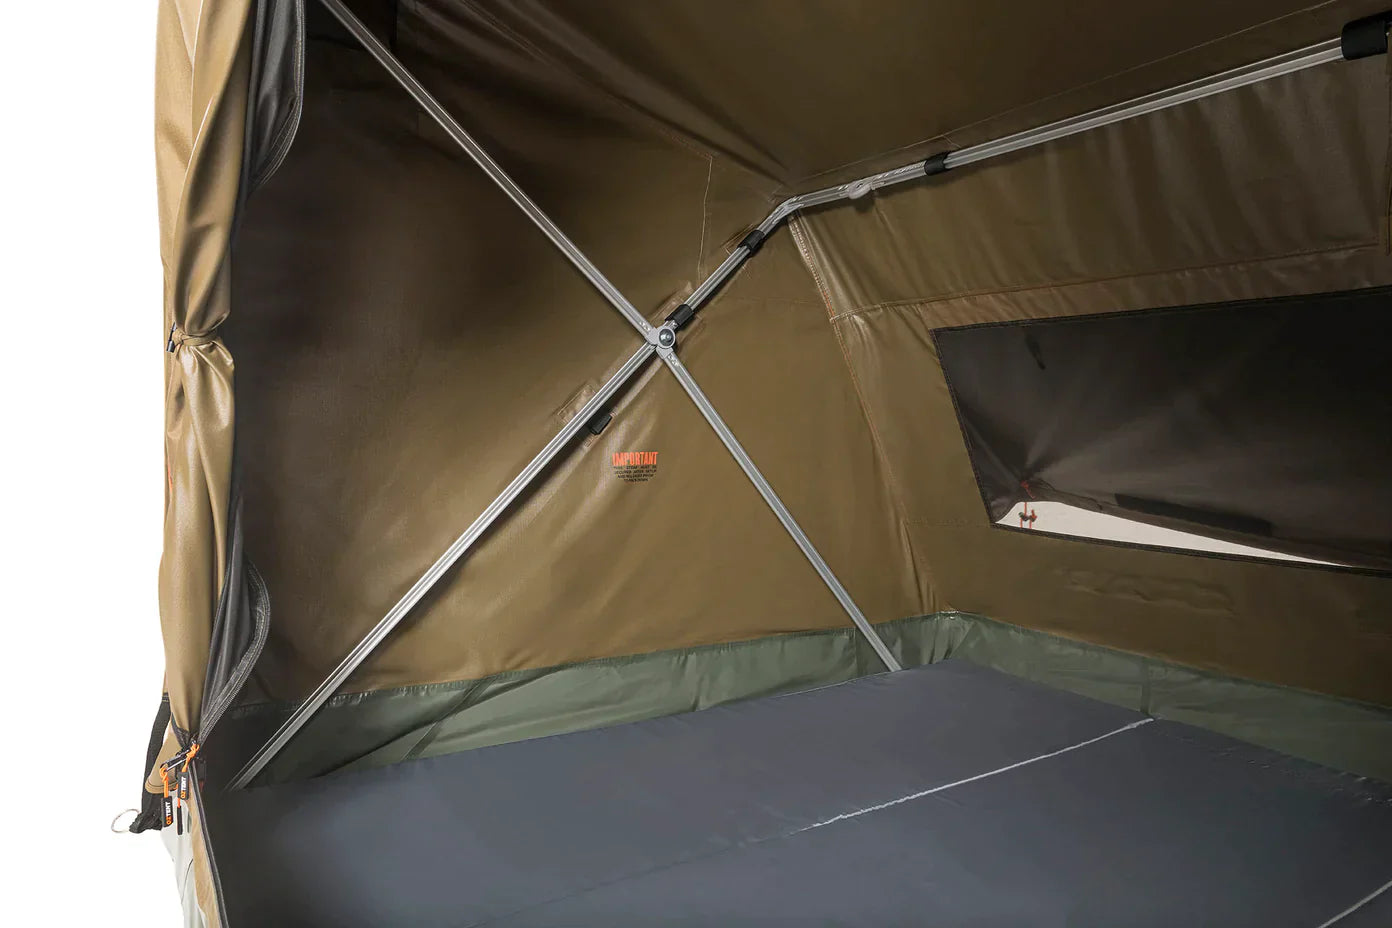 Oztent RS-2 Double Swag - One swag for two people. 30-Second setup. Built to last.